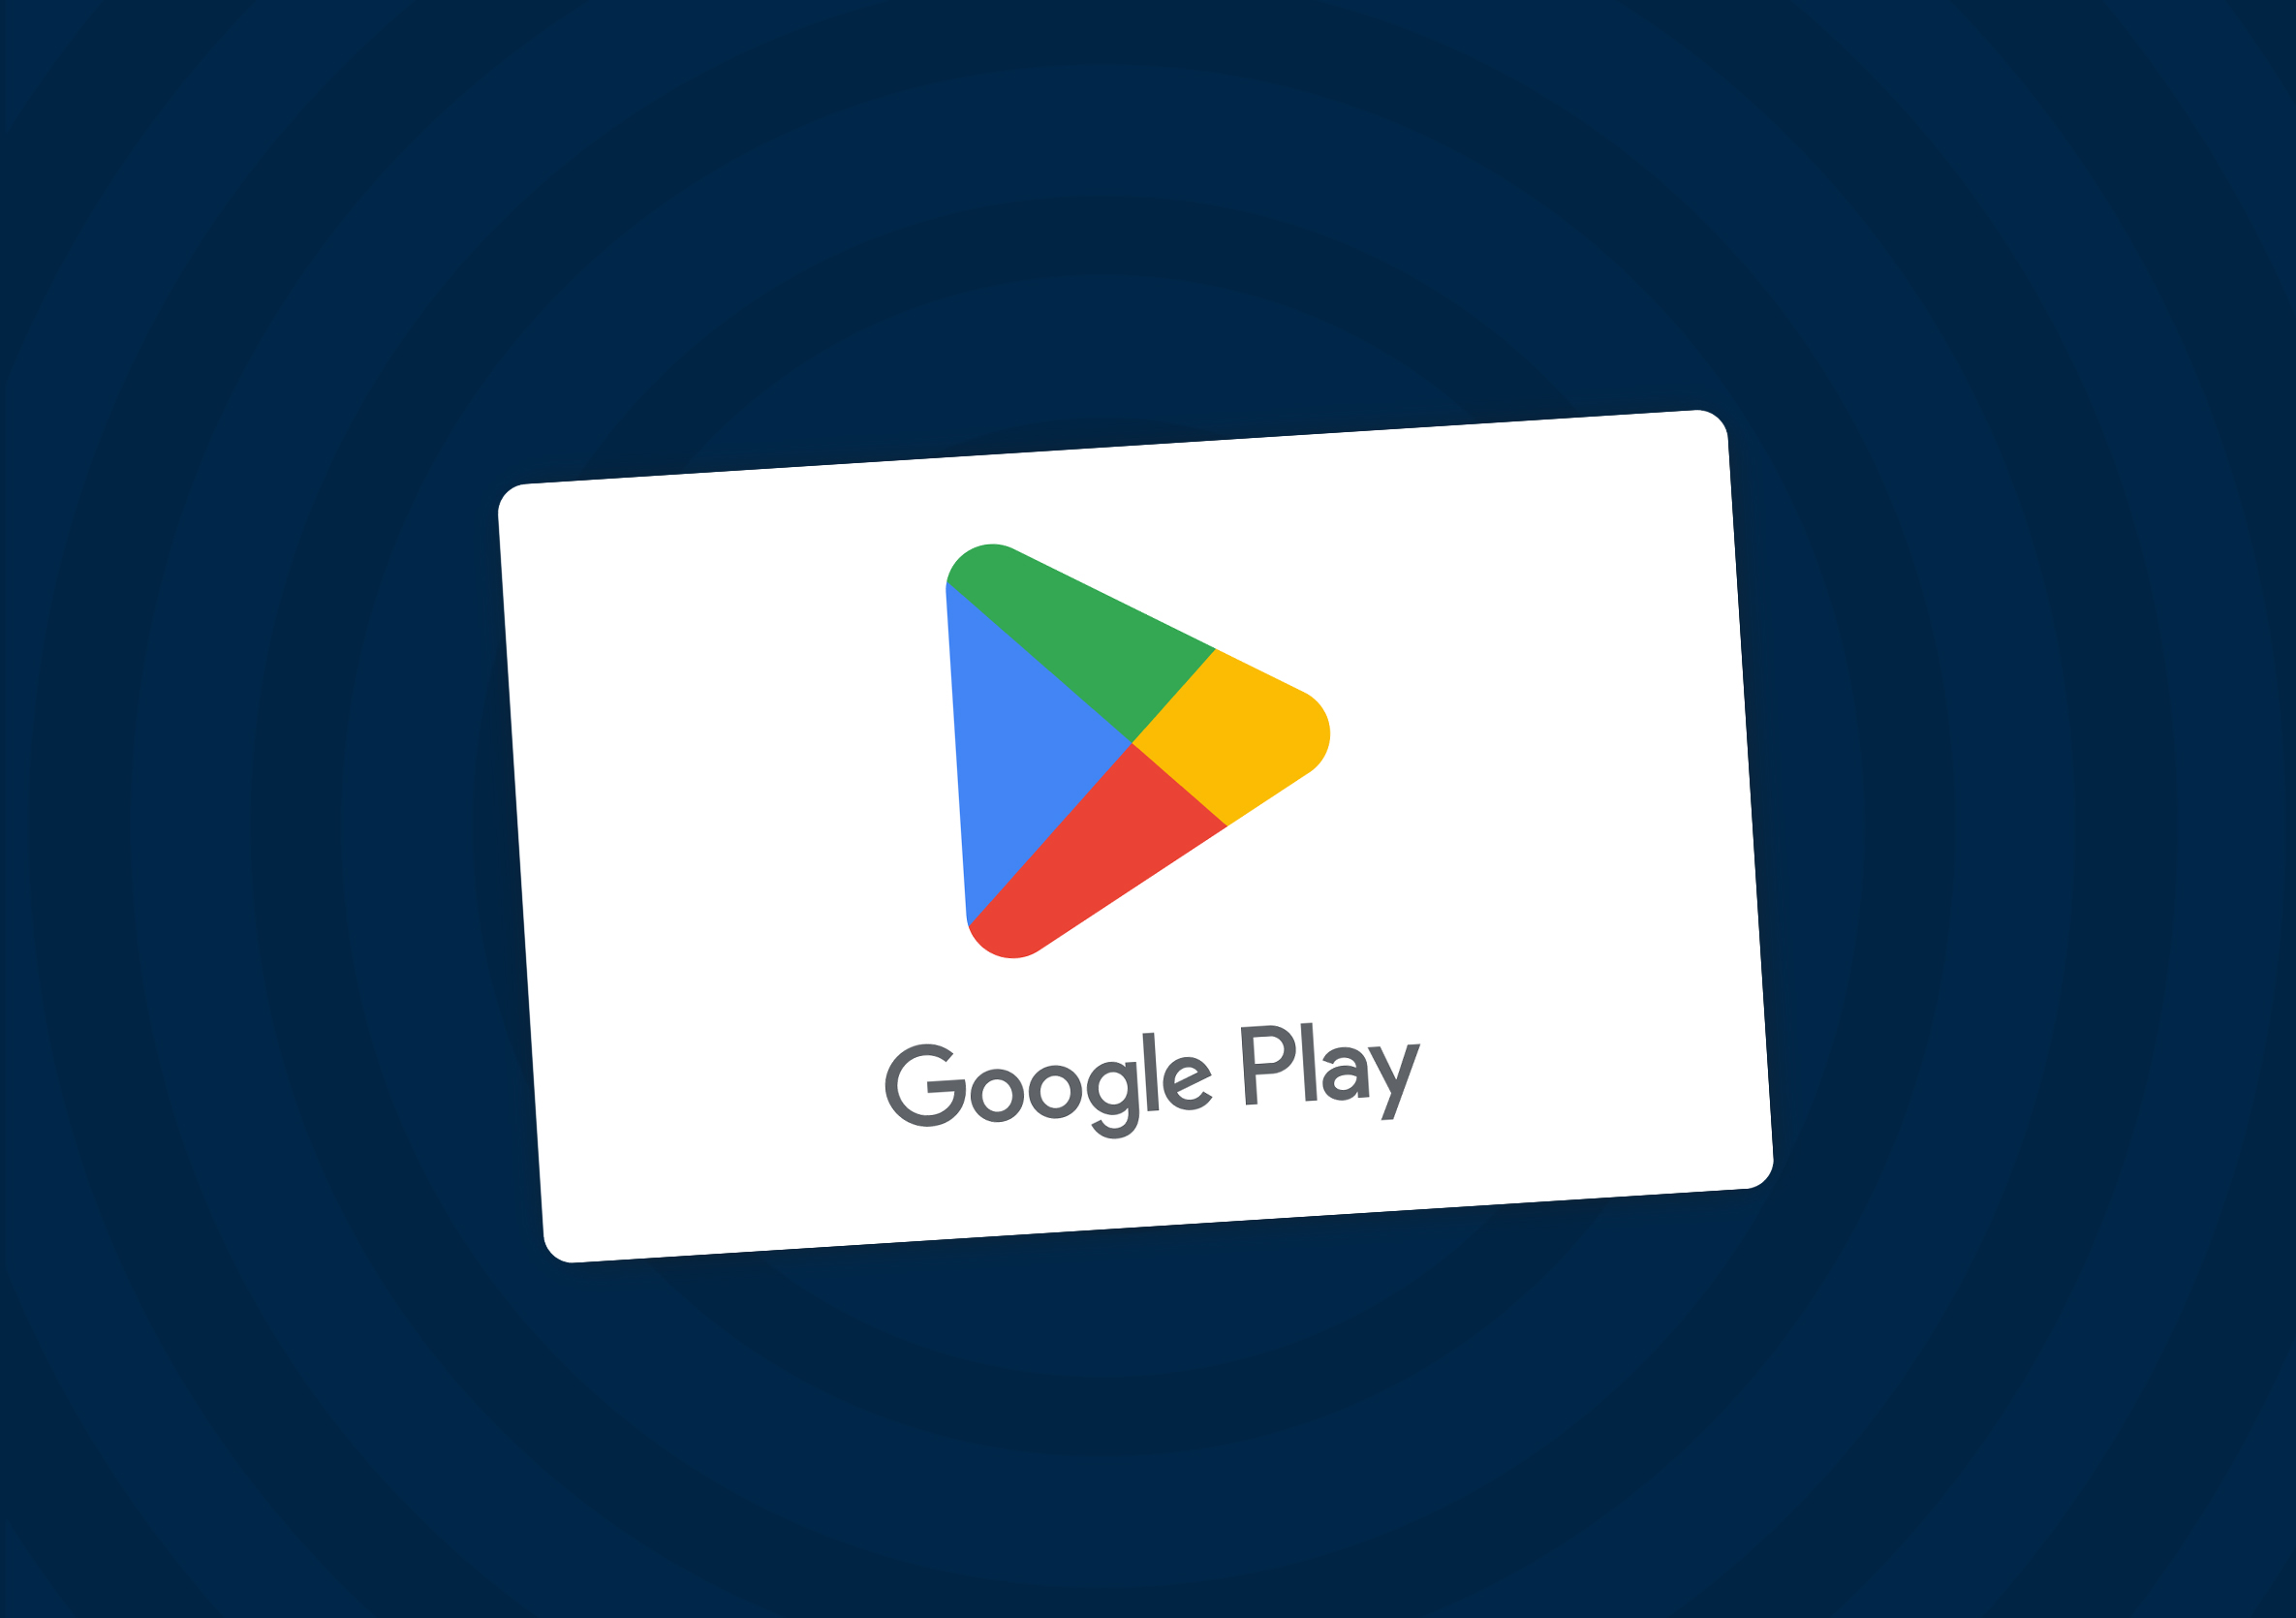 All You Need To Know About The Google Play Gift Card - Cardtonic